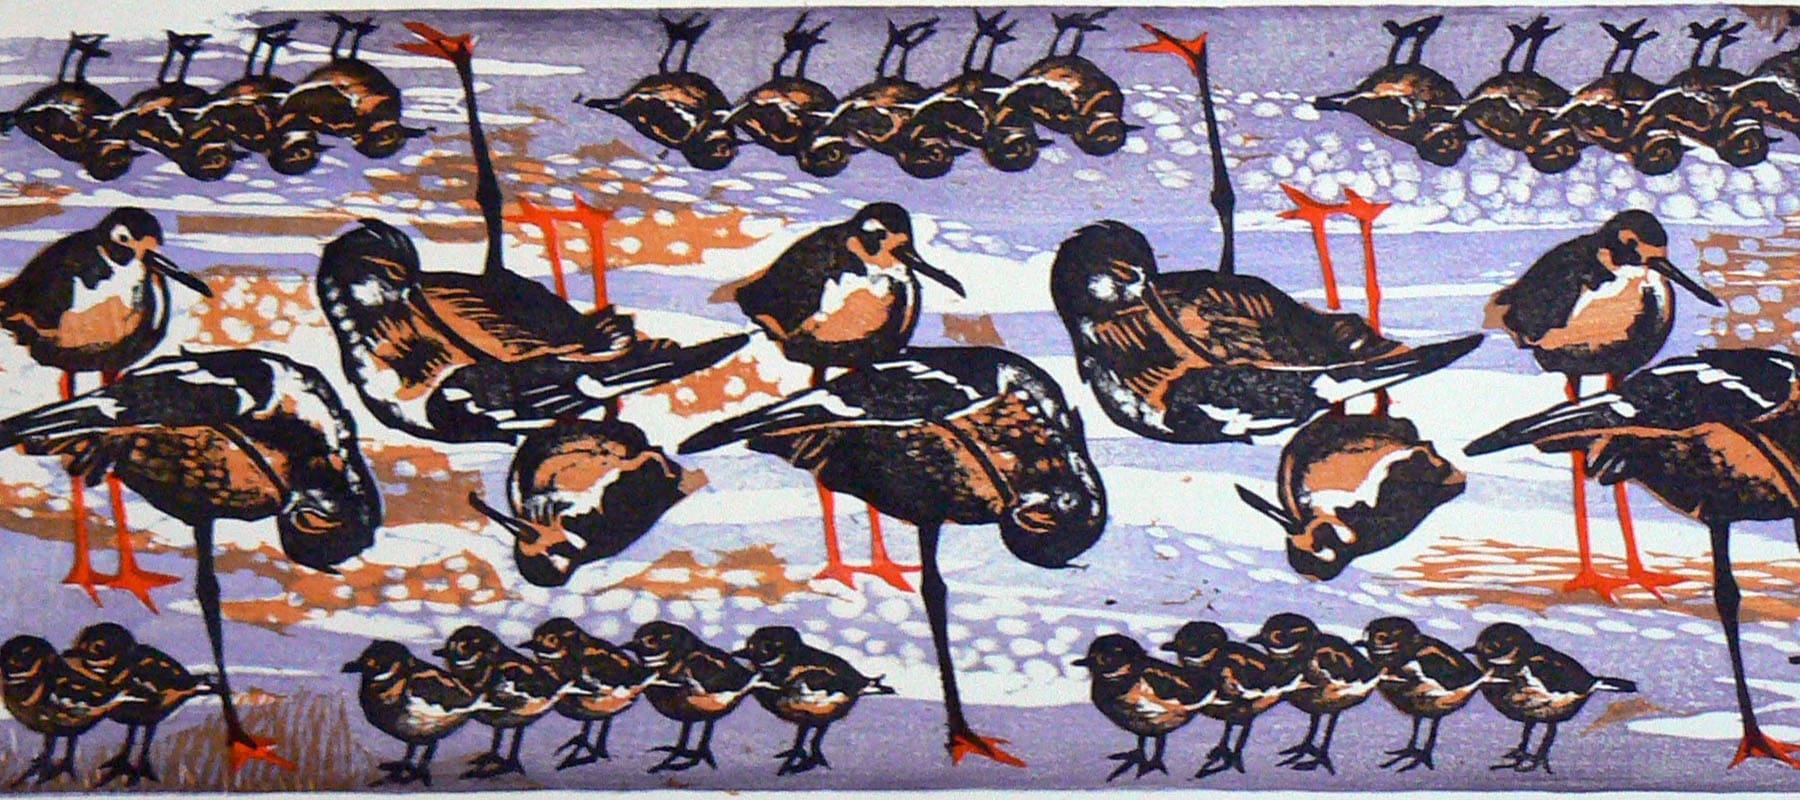 Many gathered birds are depicted on a Japanese print.